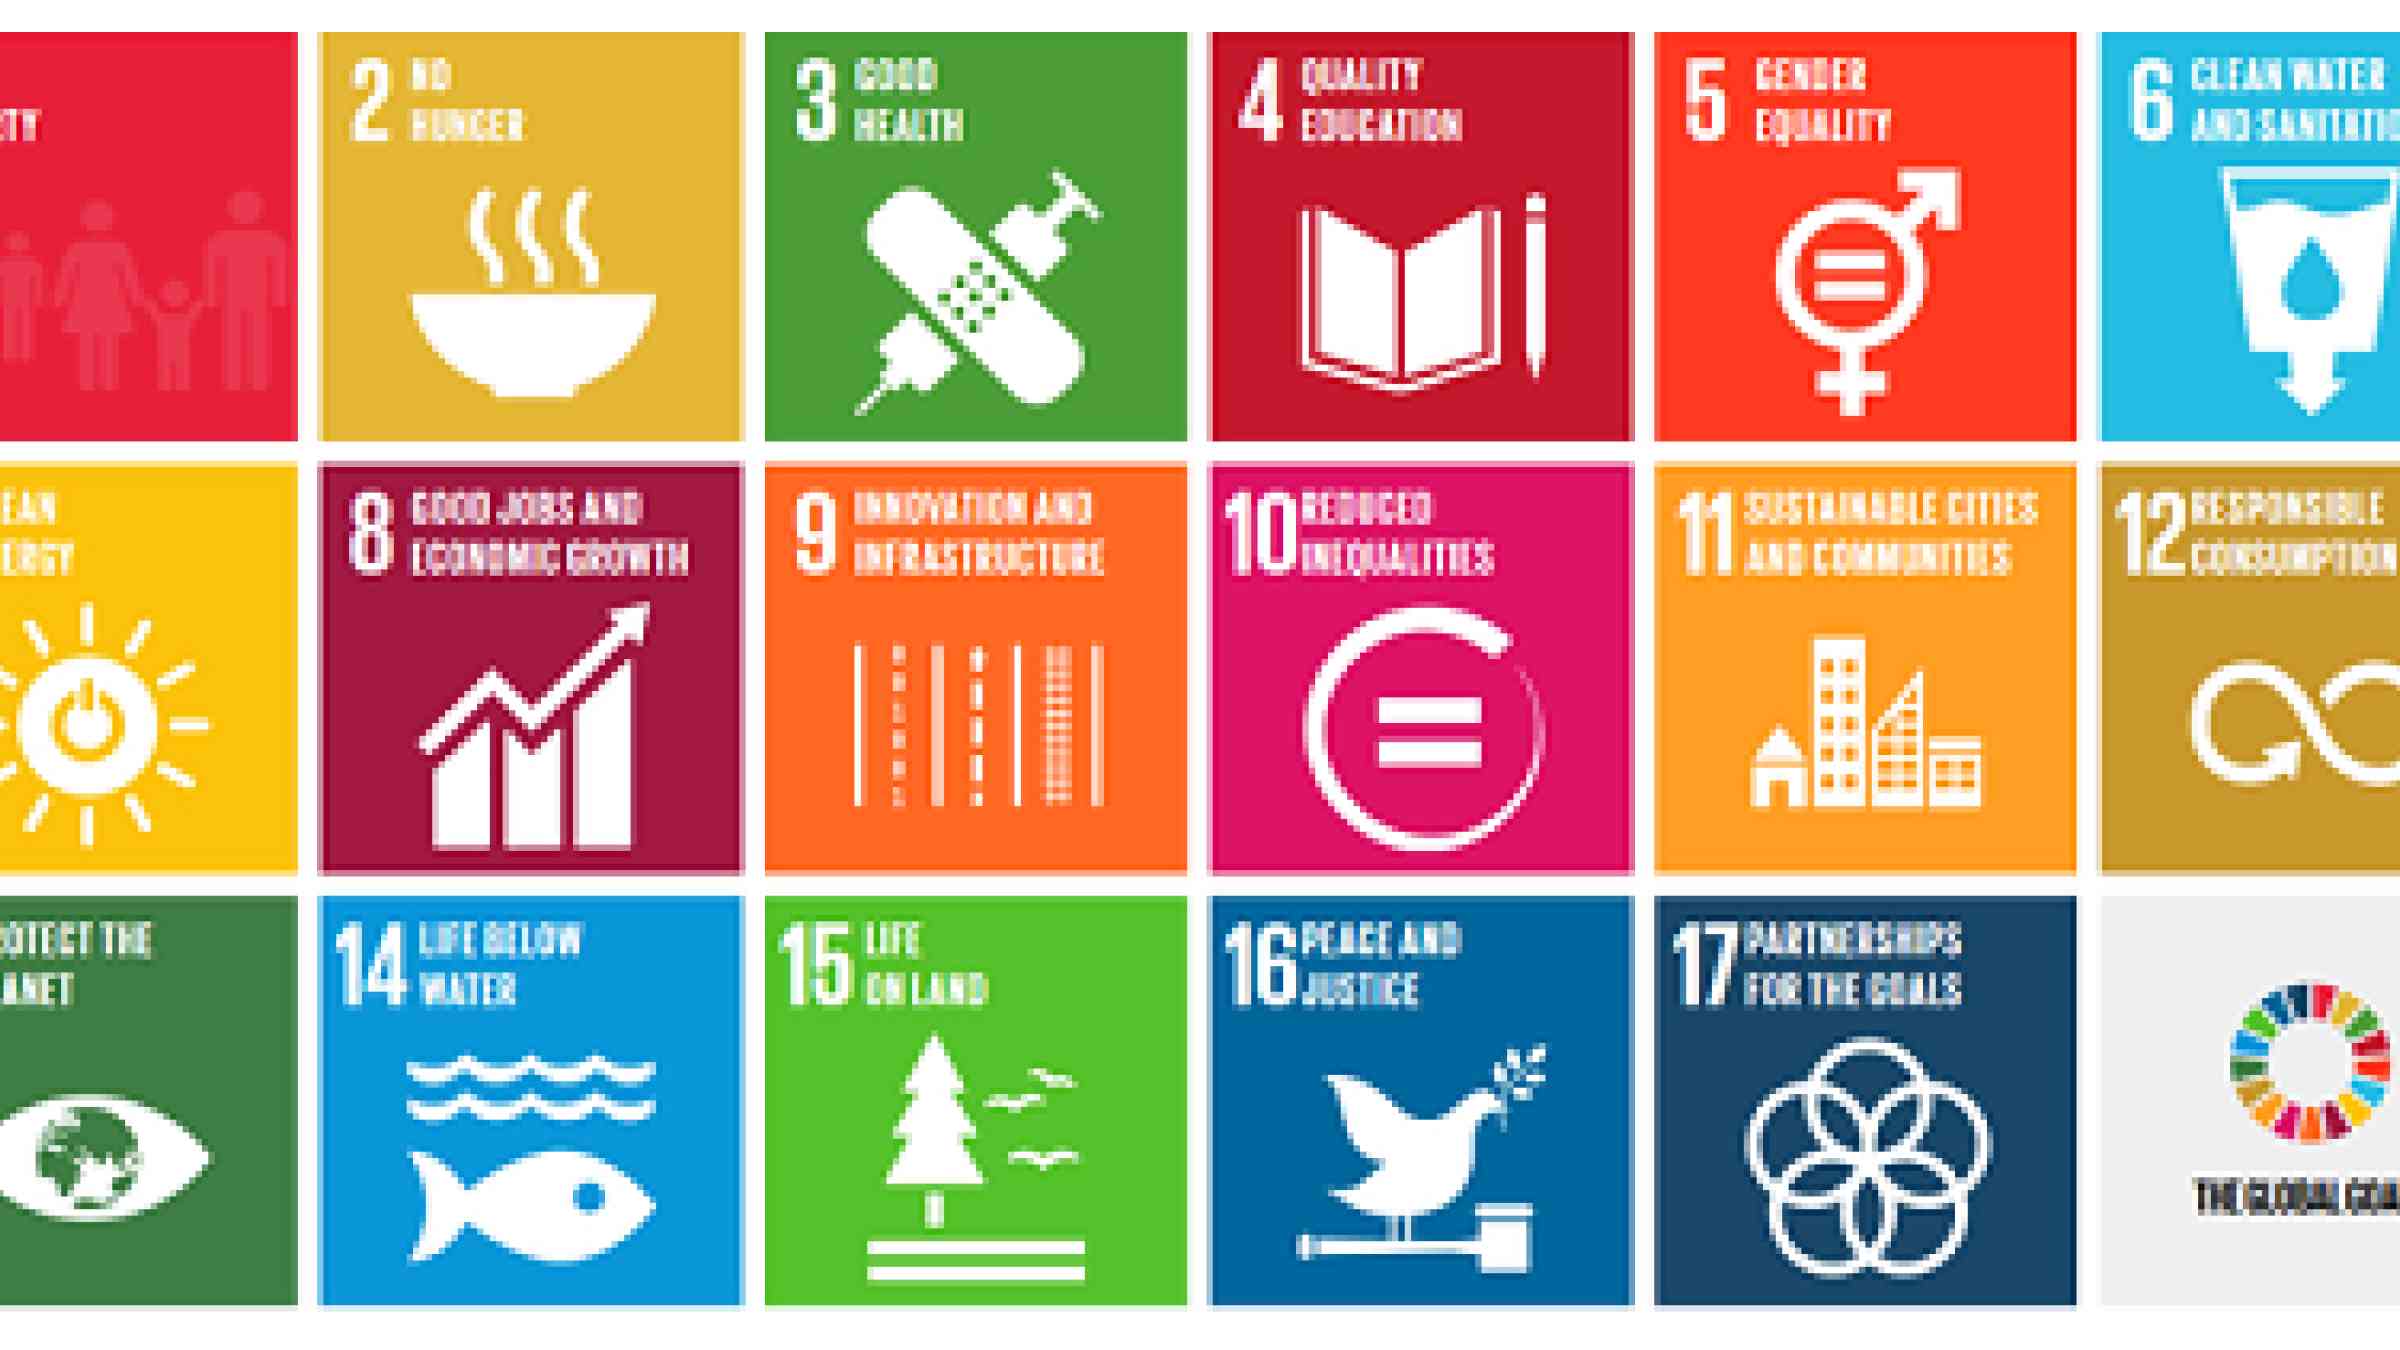 "Transforming our World: The 2030 Agenda for Sustainable Development" is made up of 17 interlocking goals (Photo: UN)